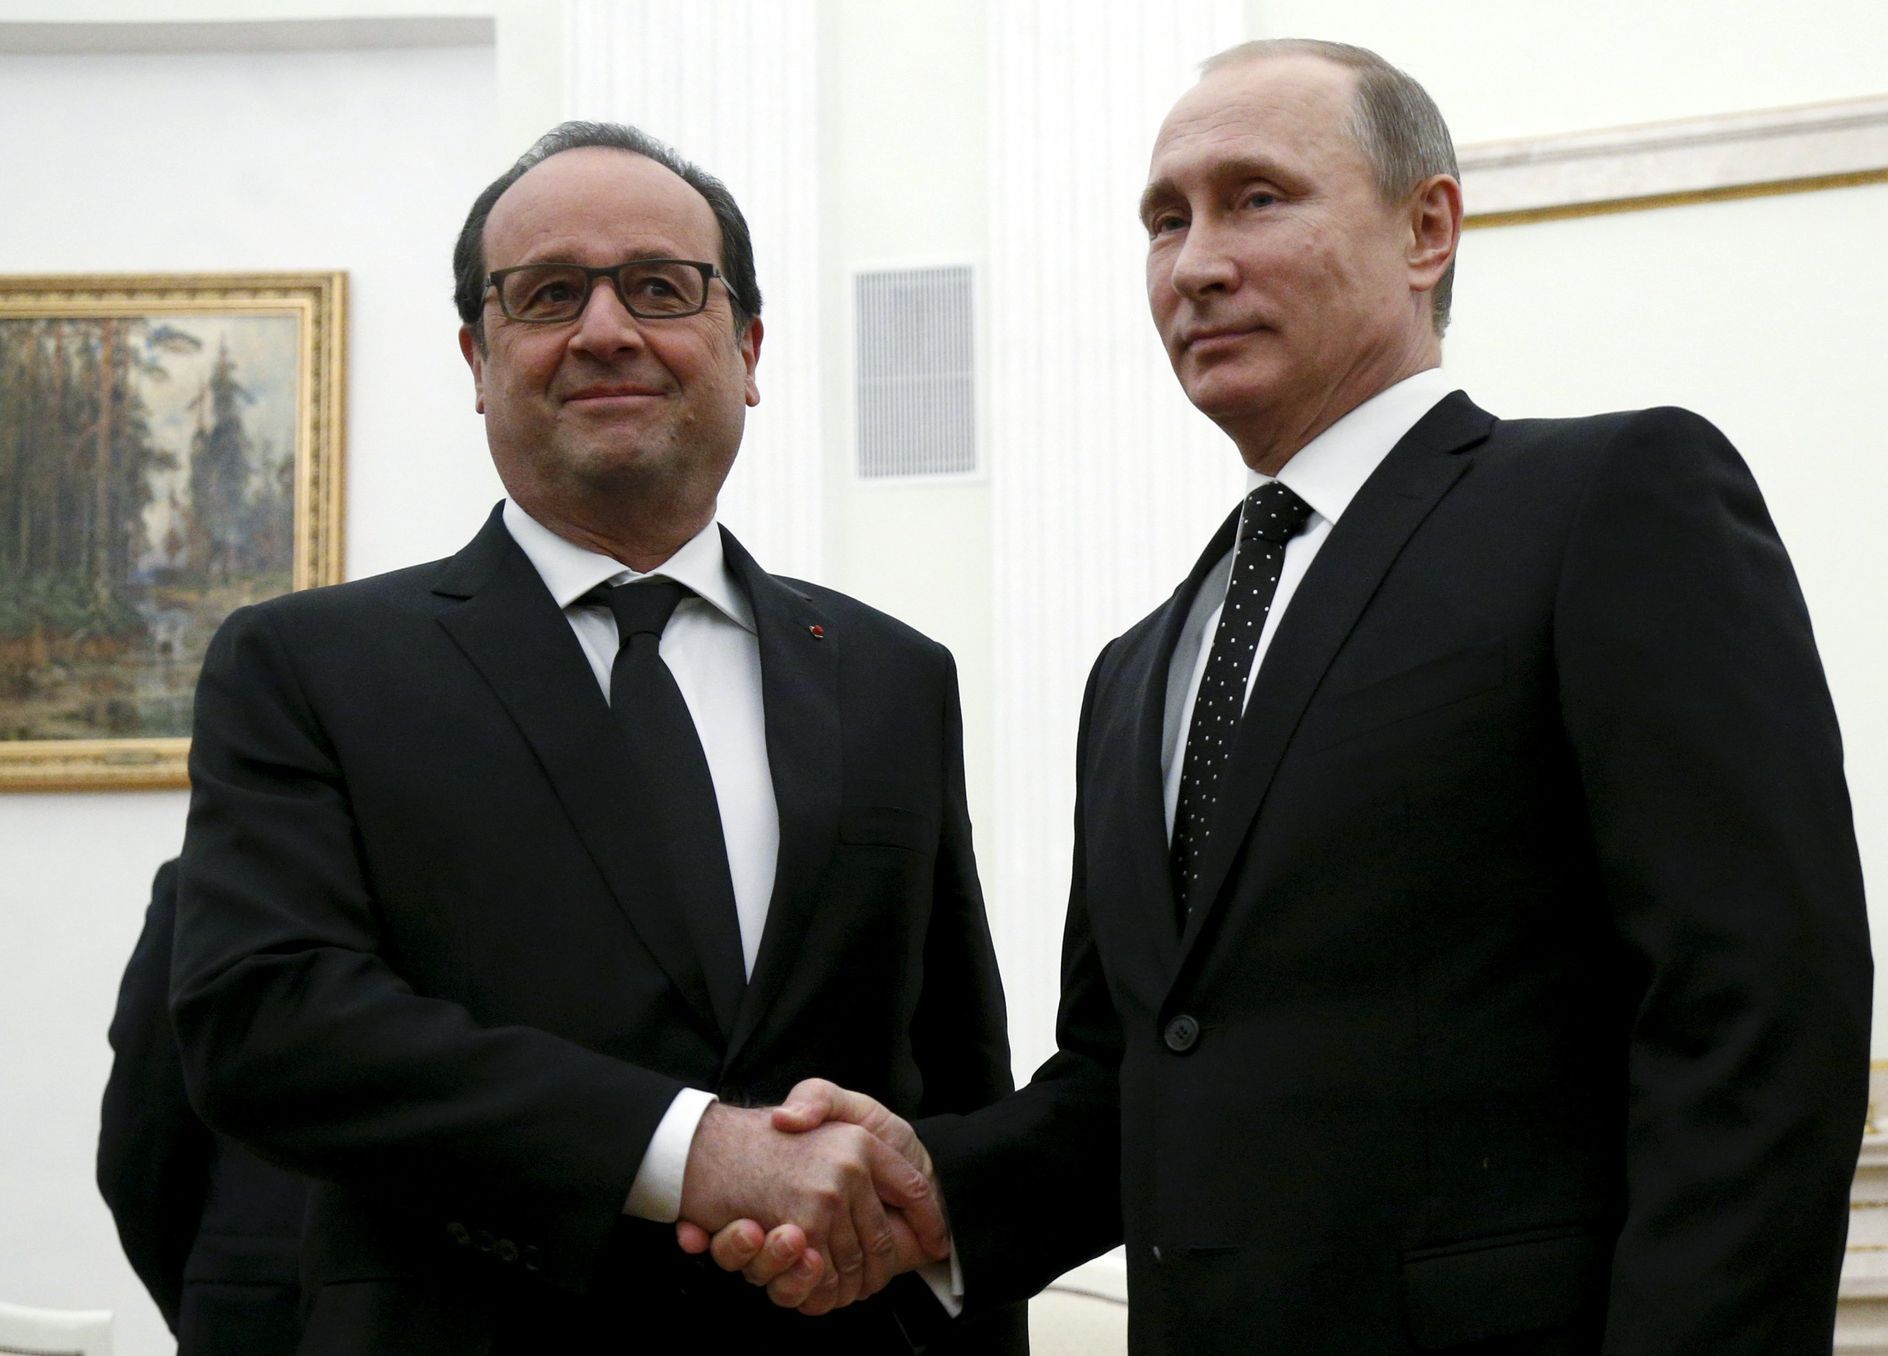 Russia's President Vladimir Putin shakes hands with his French counterpart Francois Hollande during a meeting at the Kremlin in Moscow